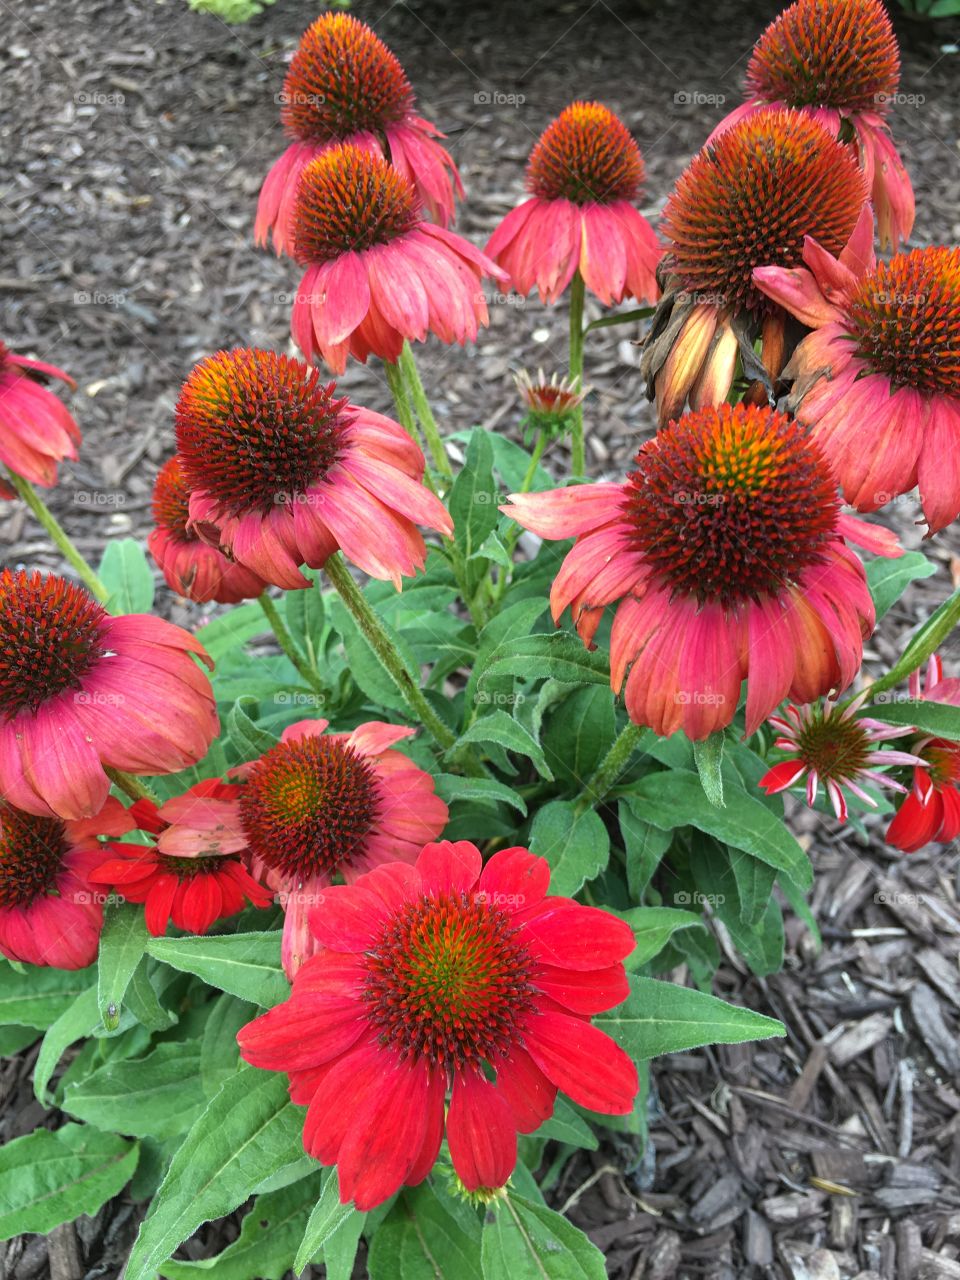 Red cone flowers